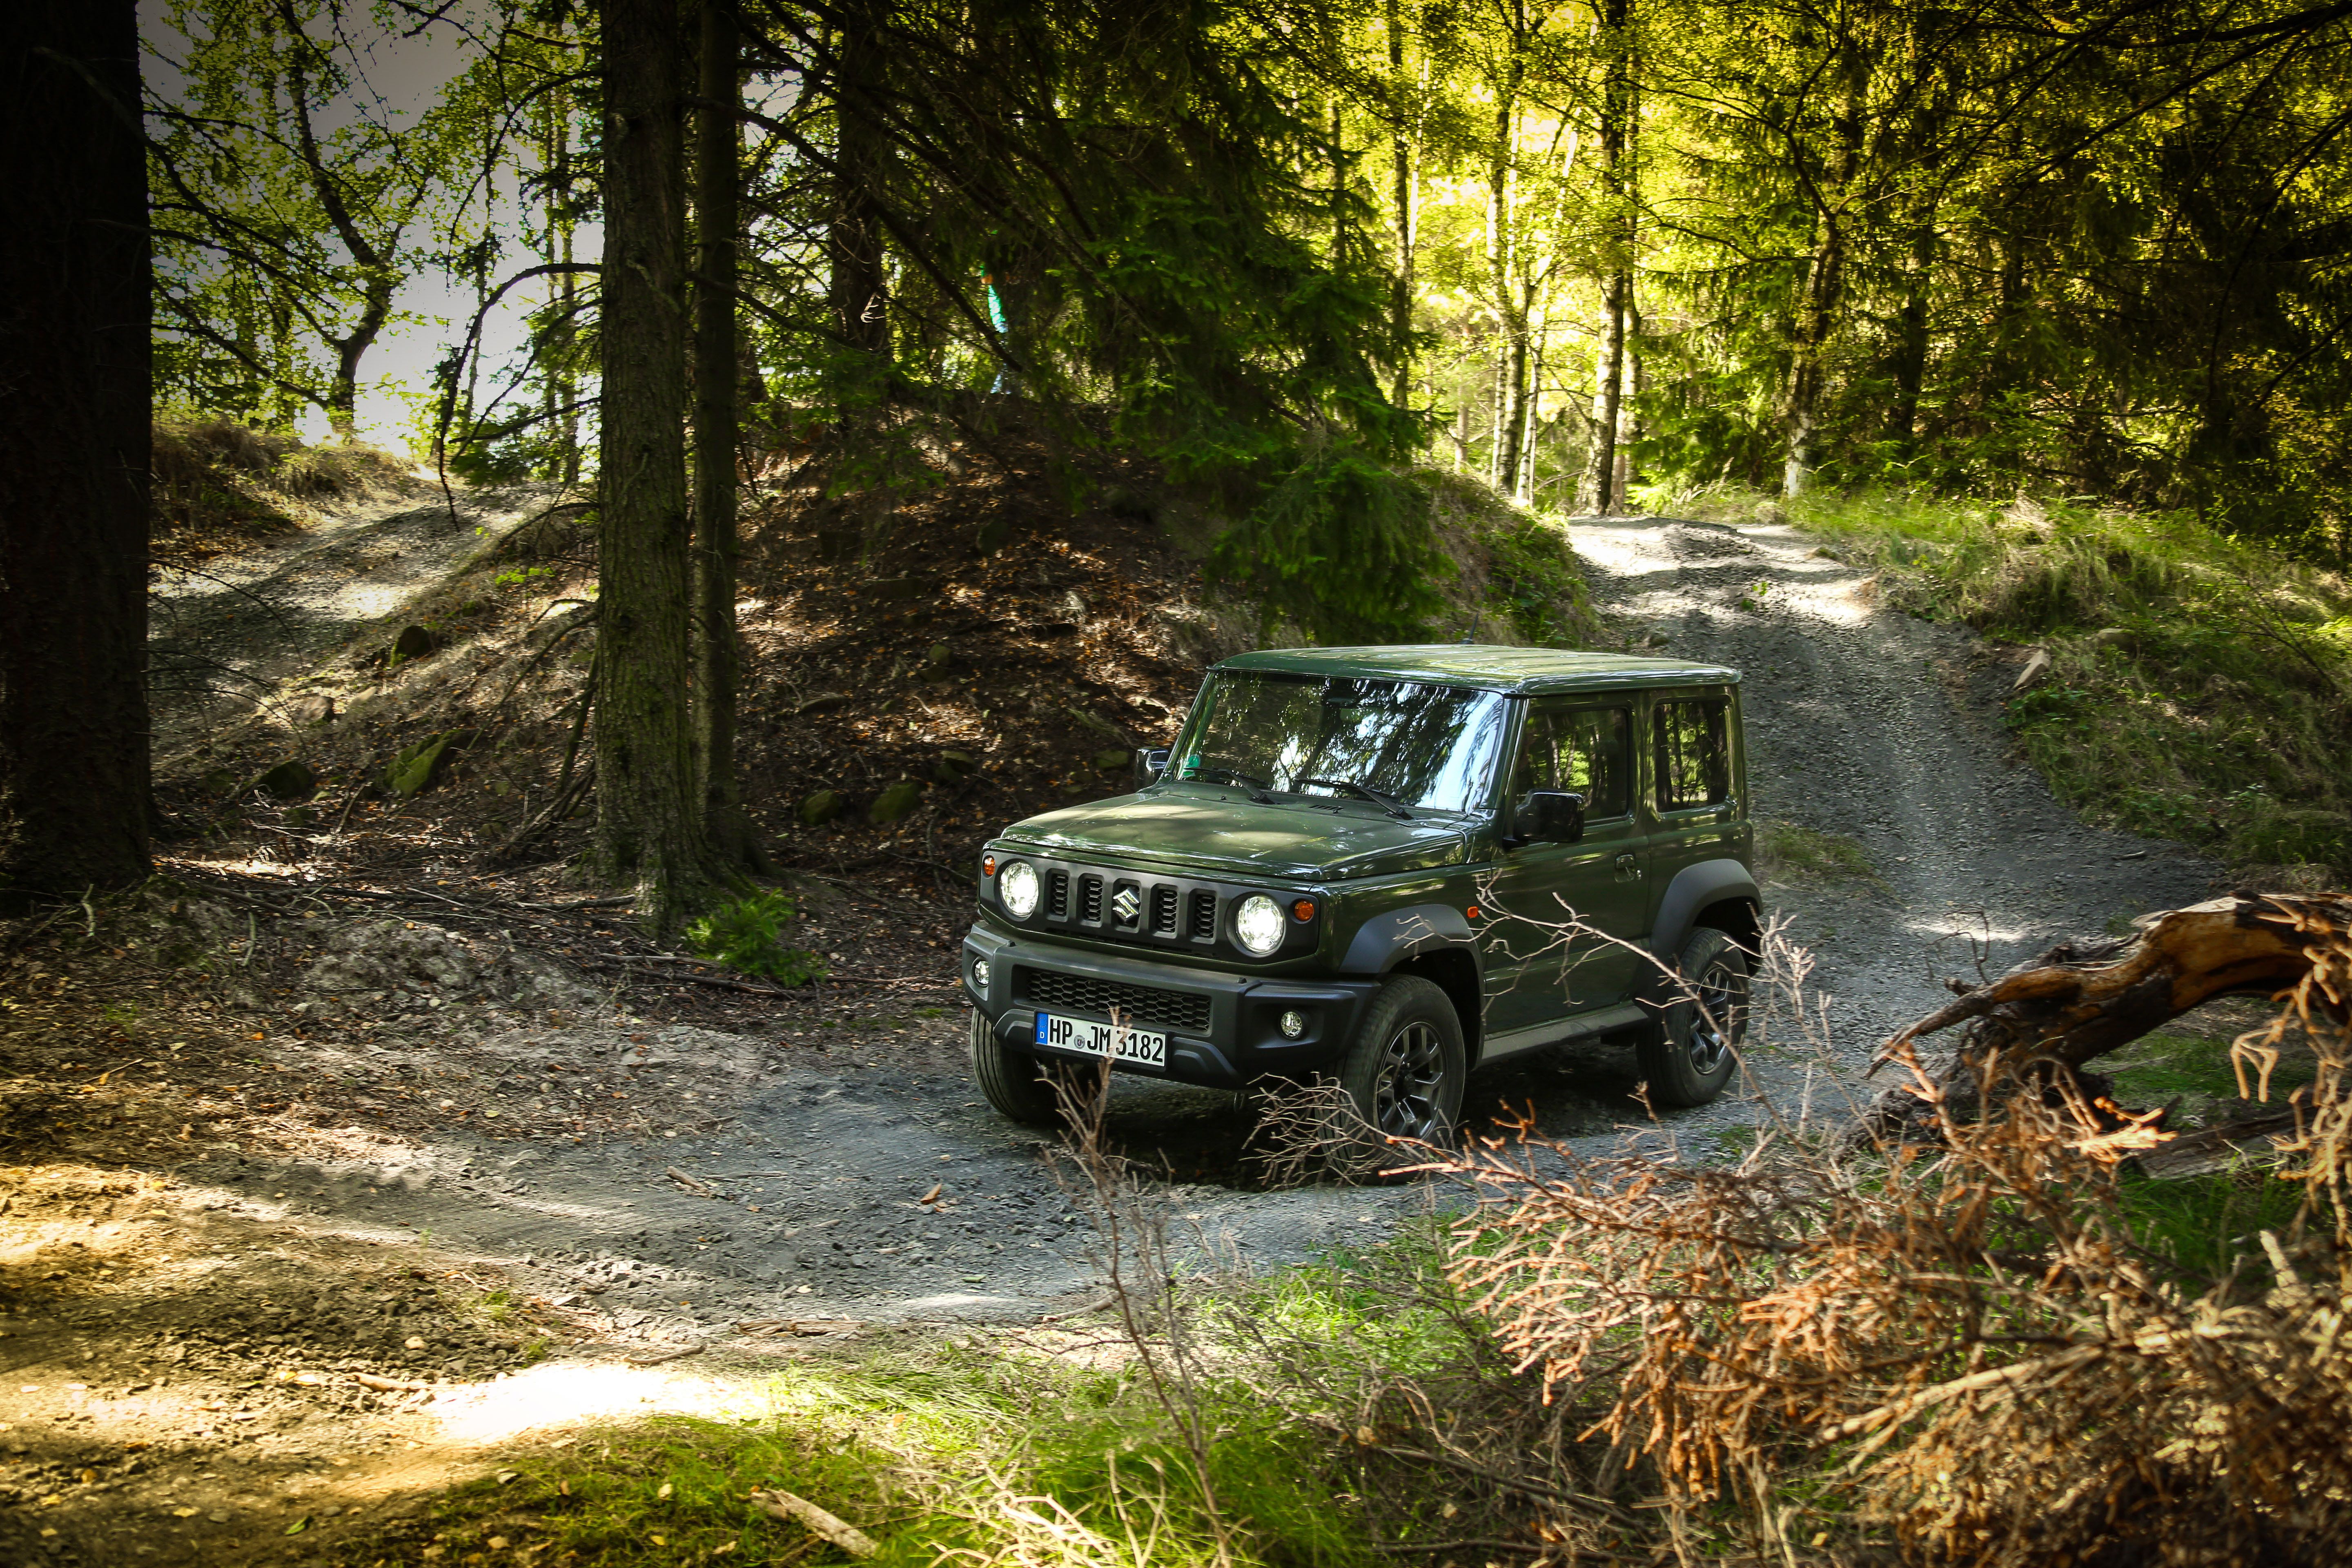 2020 Suzuki Jimny Is an Adorable and Tiny Off-Road Box that We Can't Buy